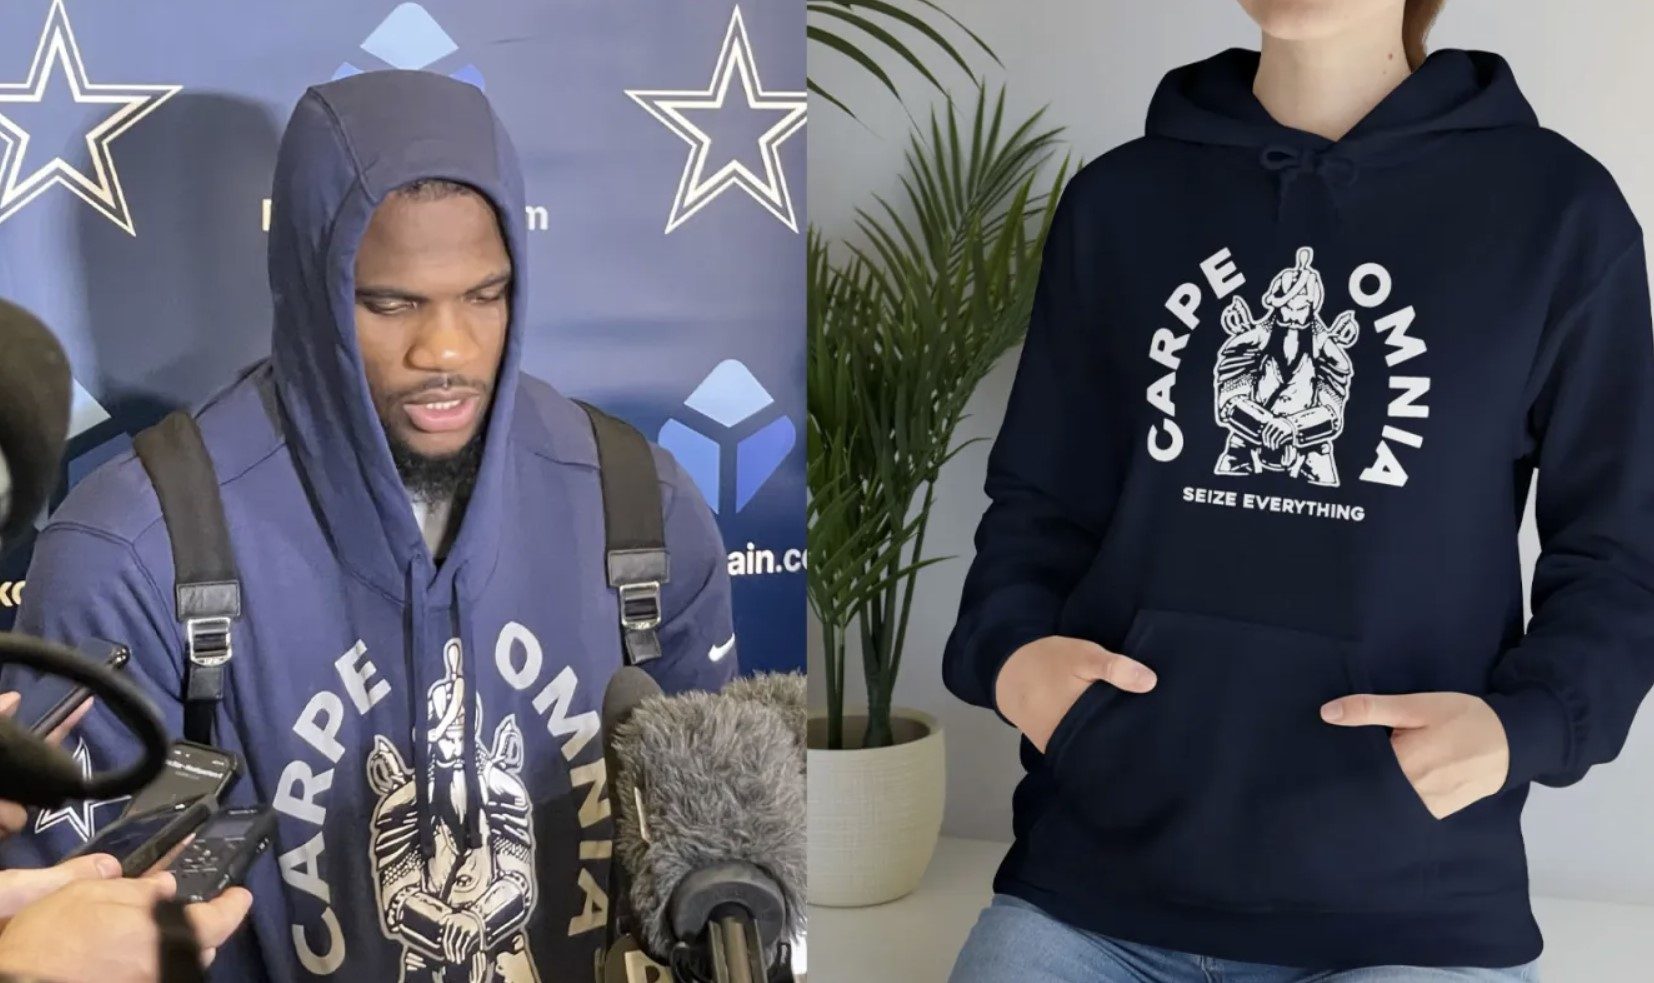 Get Your Cowboys “Carpe Omnia: Seize Everything” Shirt and Join the 2023 Season’s Rallying Cry